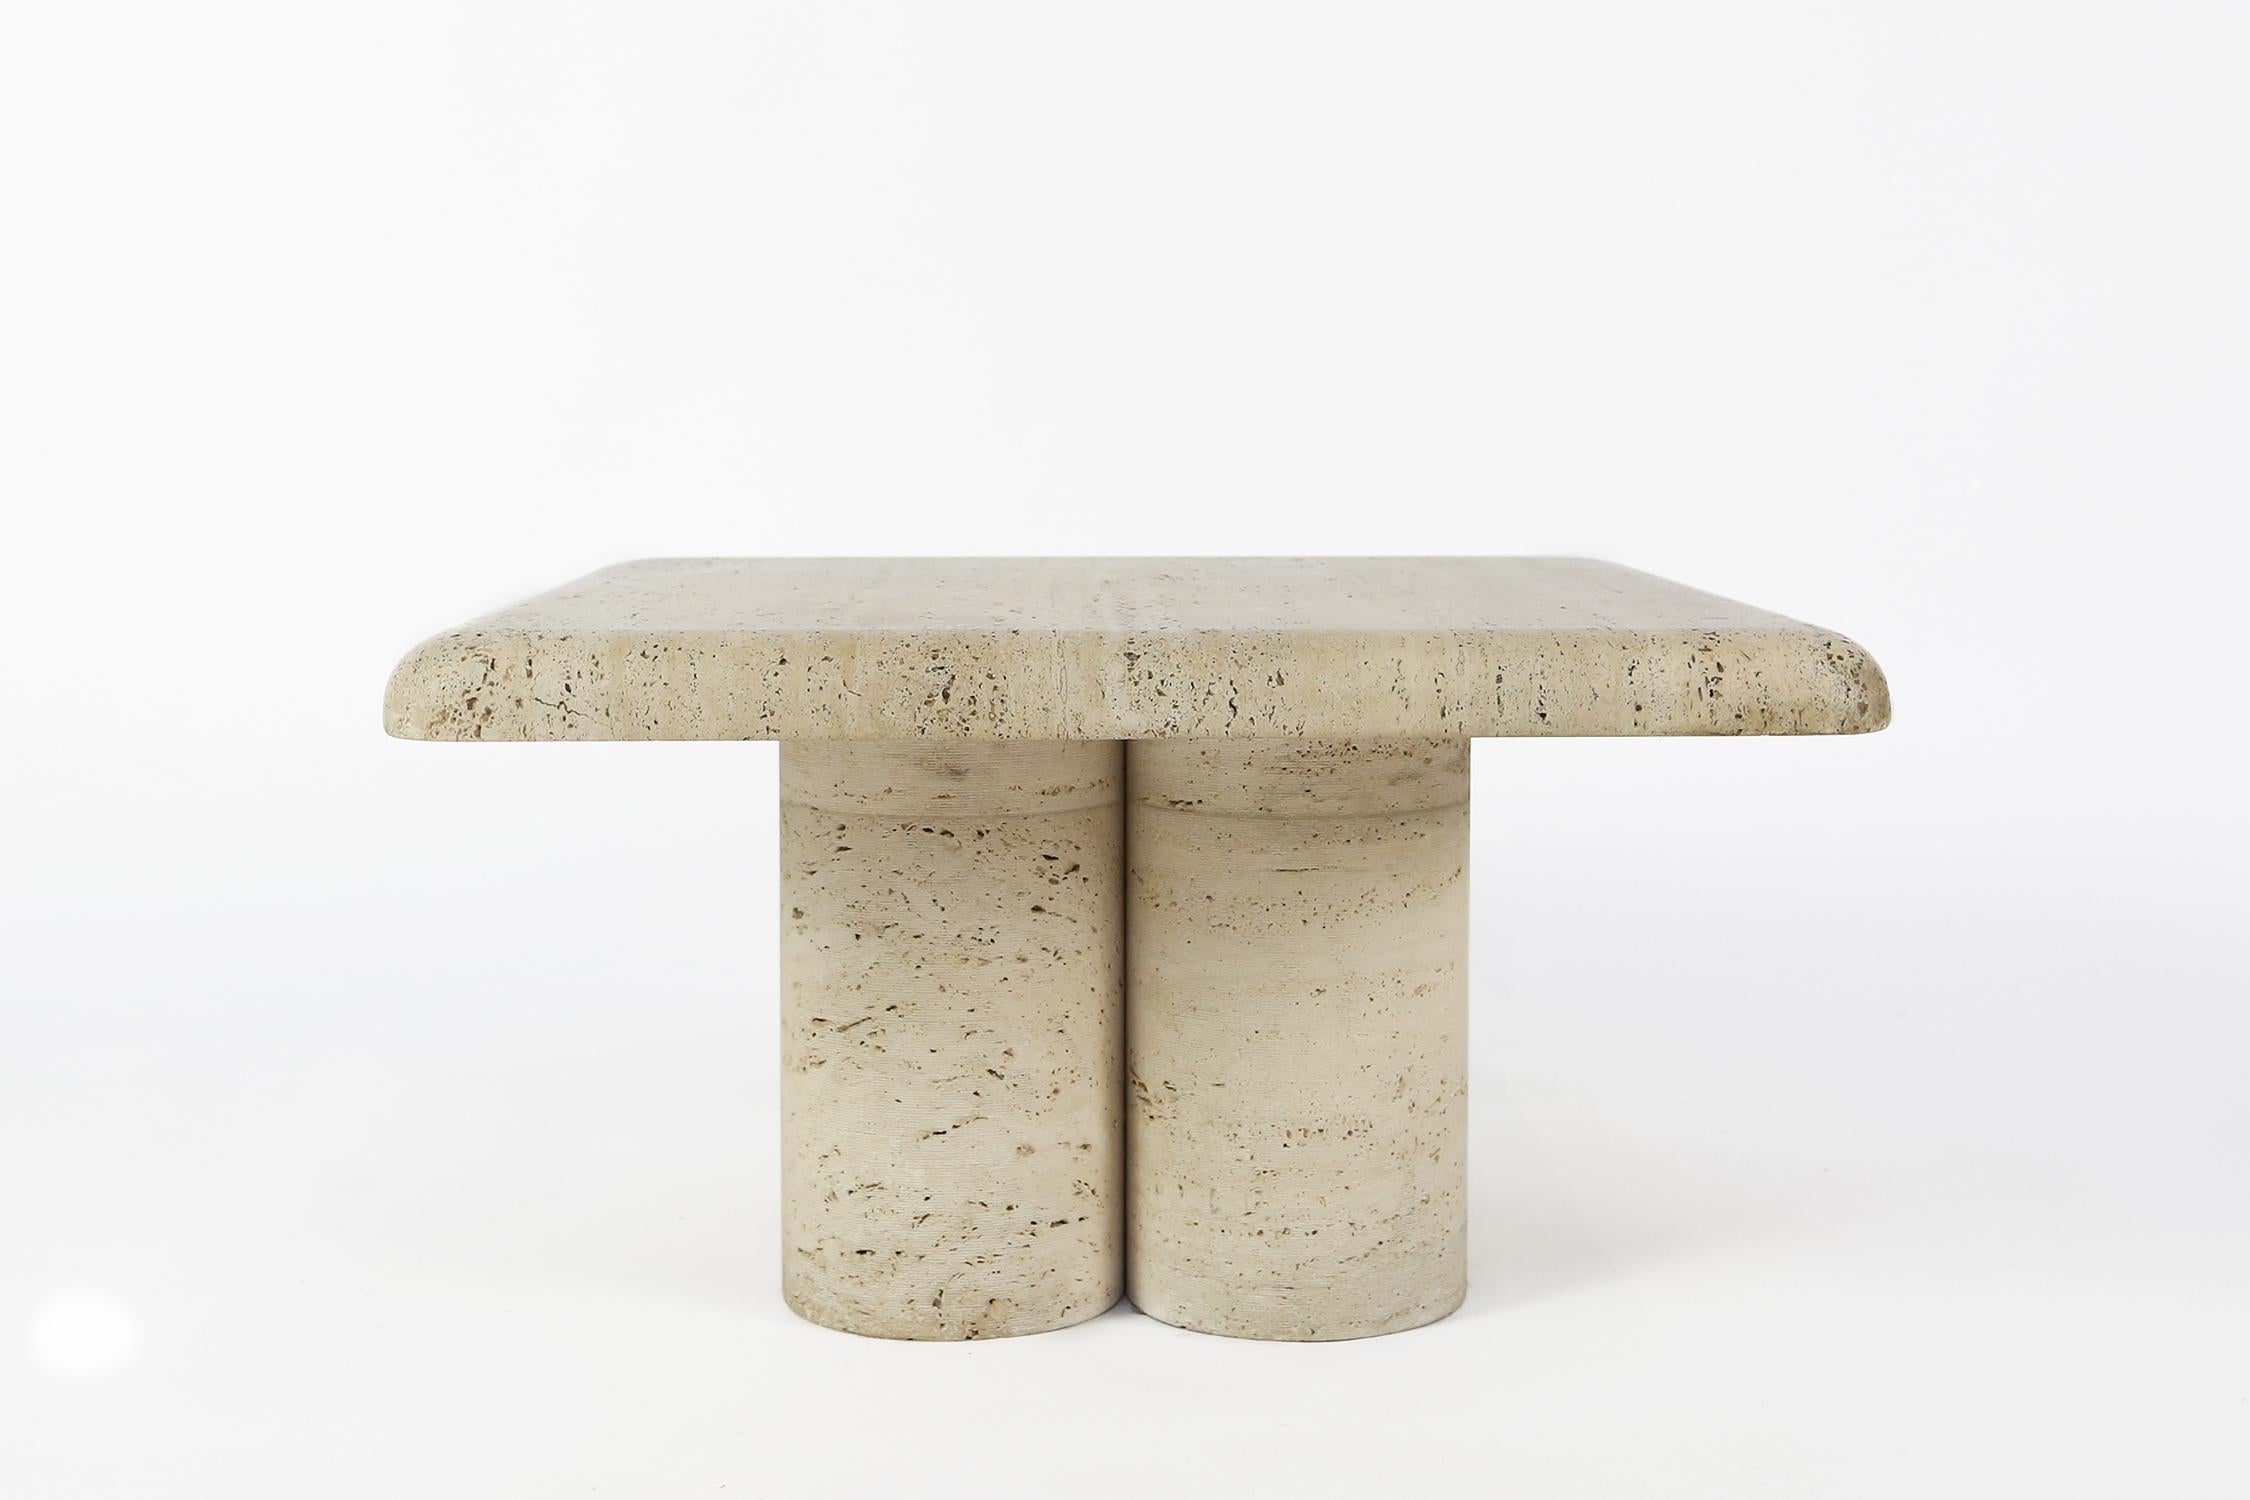 Rare side table or small coffee table in travertine made in Italy in the 1970s by Up&Up
This coffee table consists of four cylindrical legs and a square table top with rounded edges.
The top comes off for easy moving.